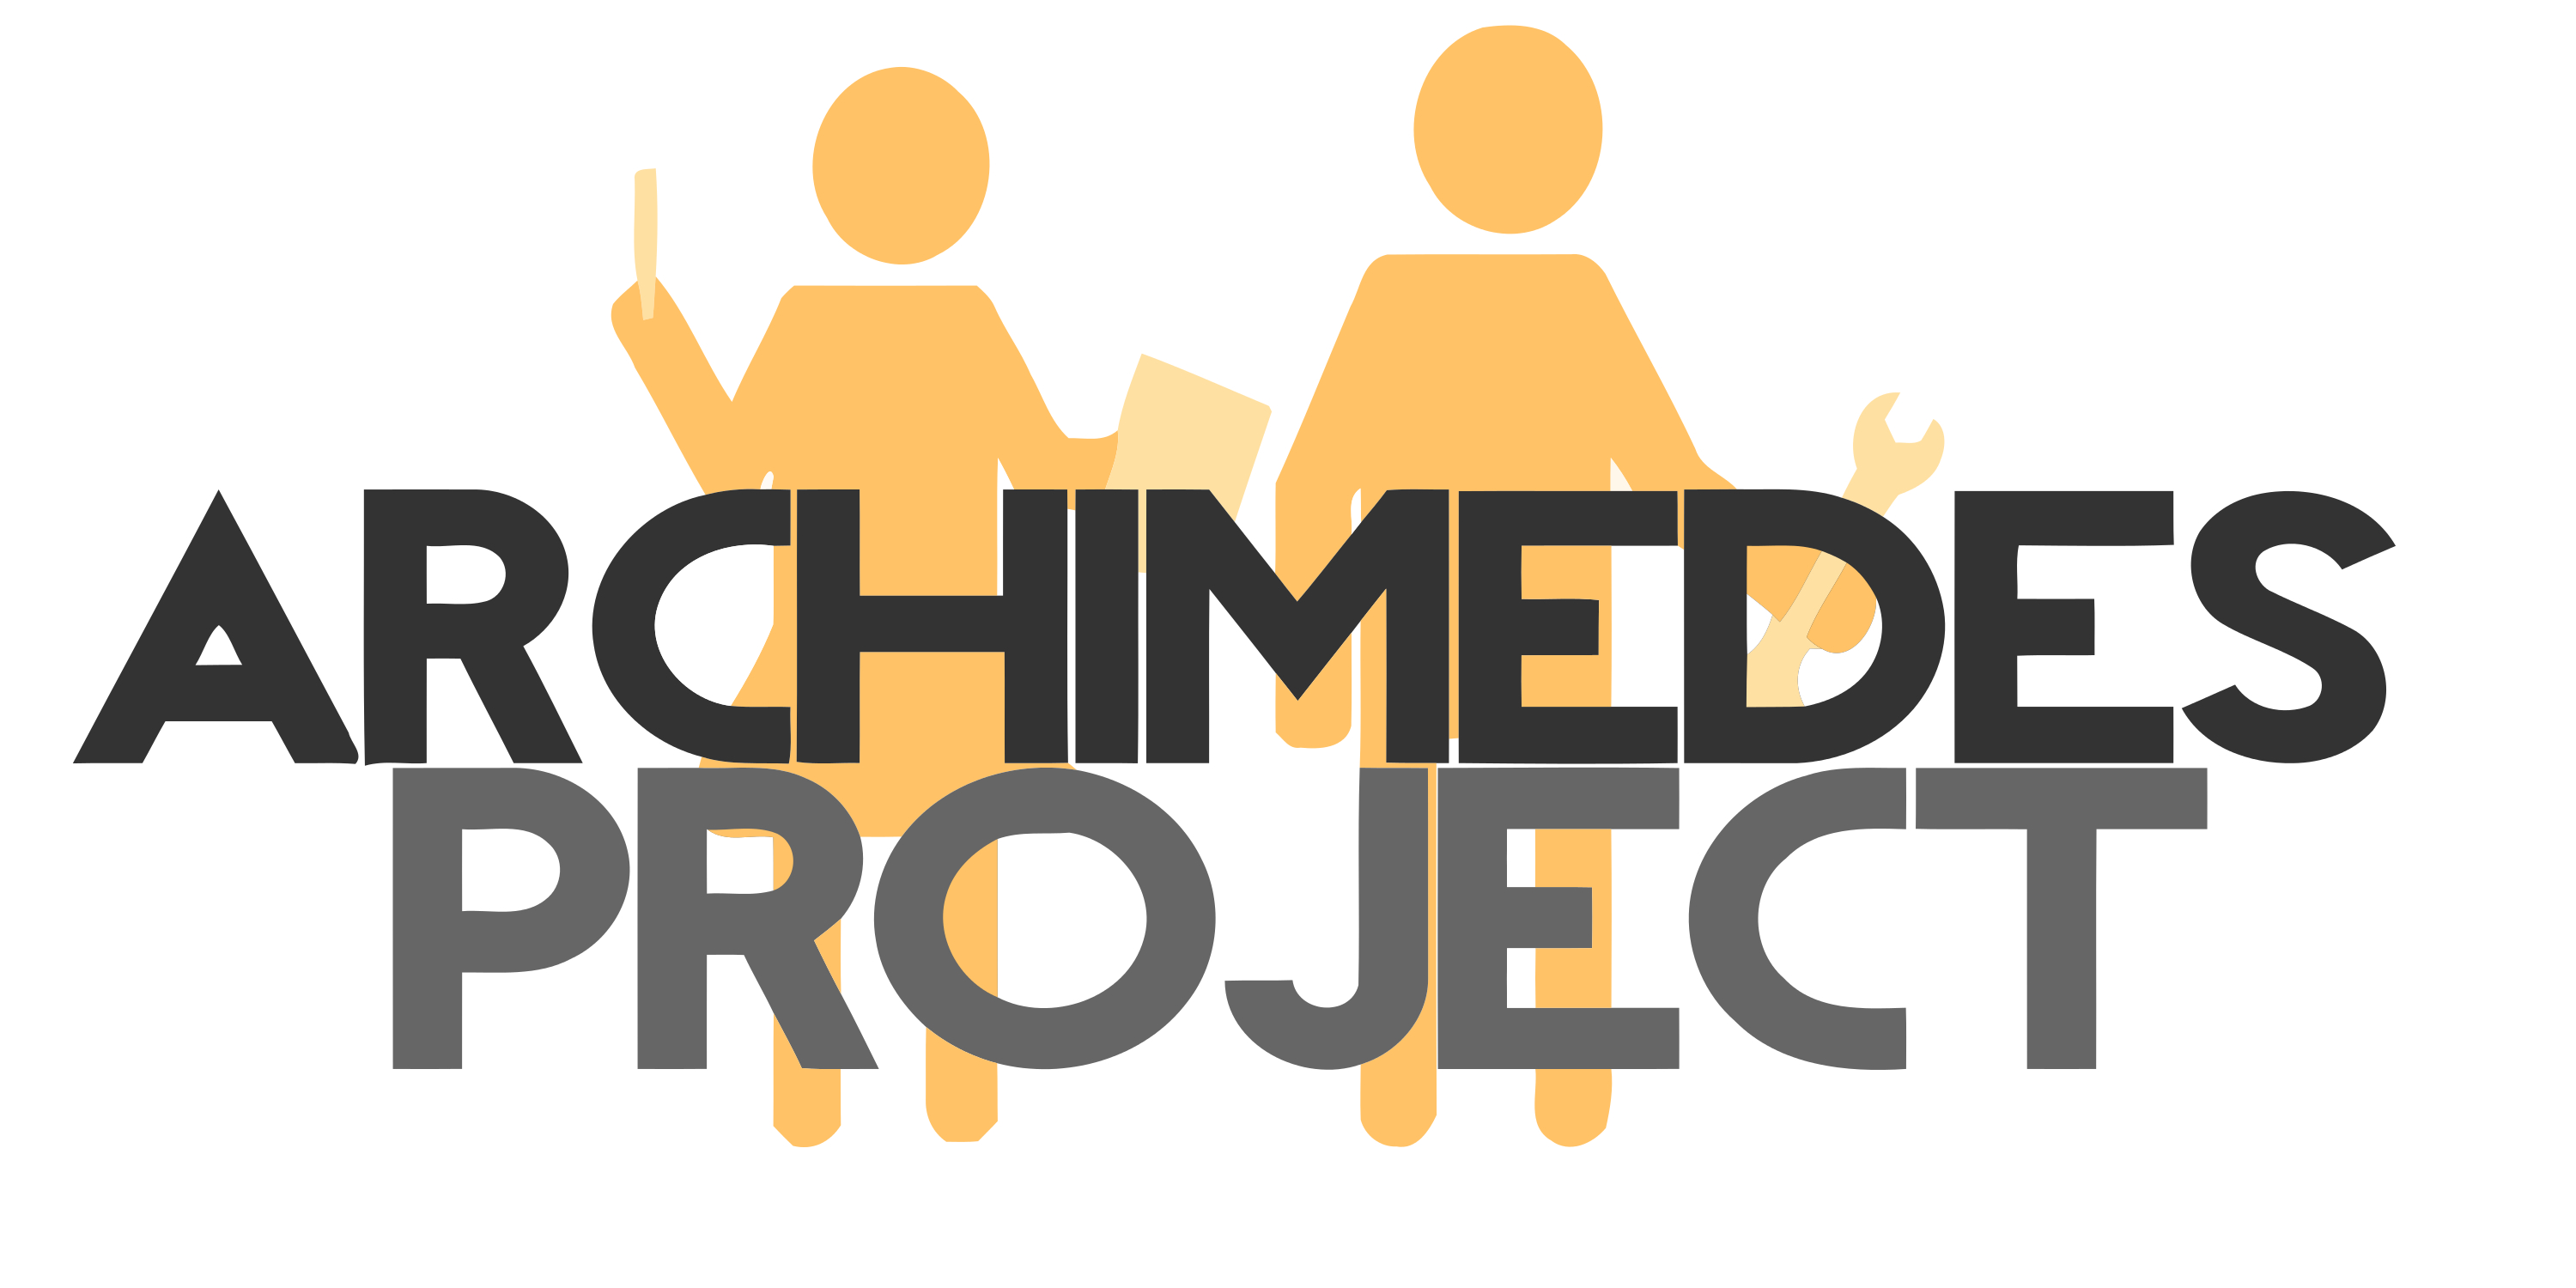 Archimedes Project logo